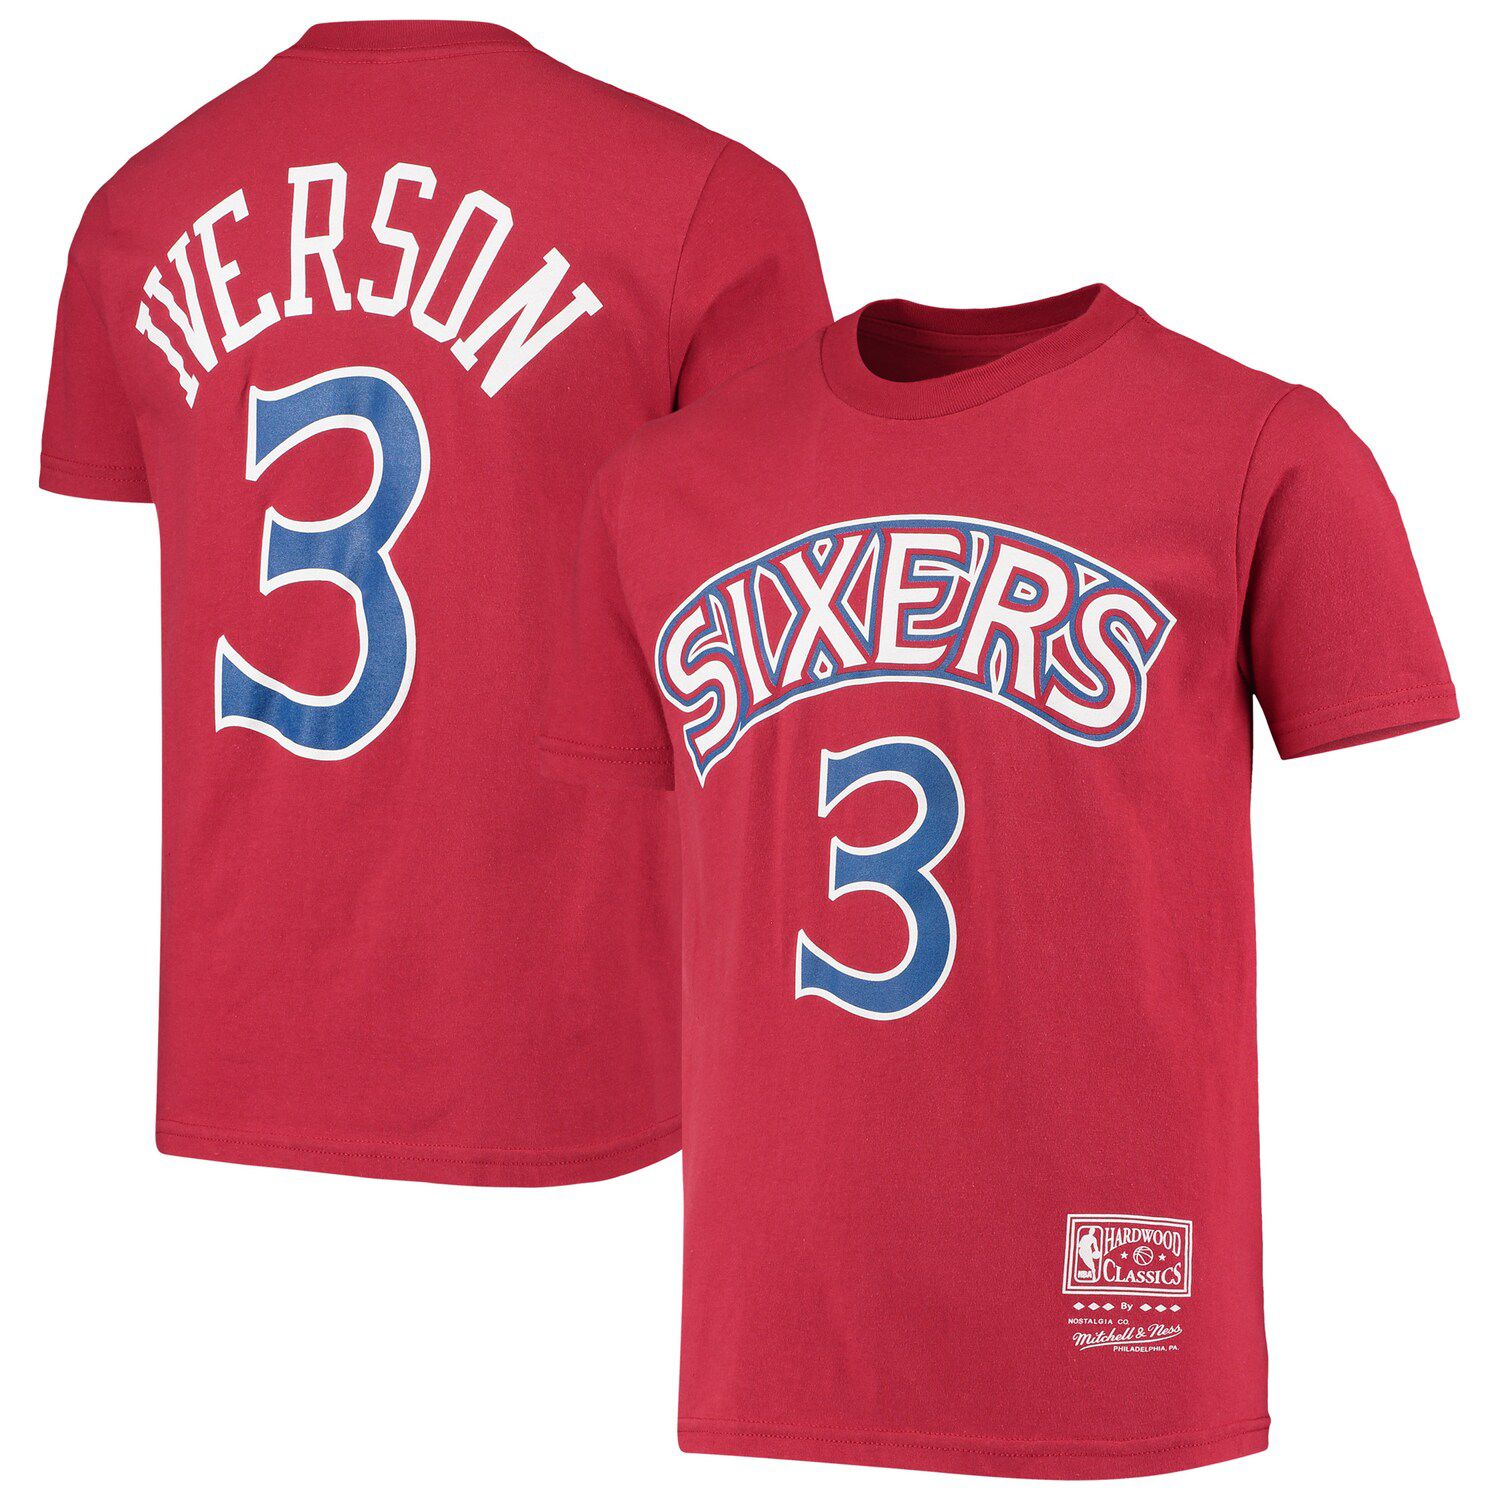 iverson jersey number